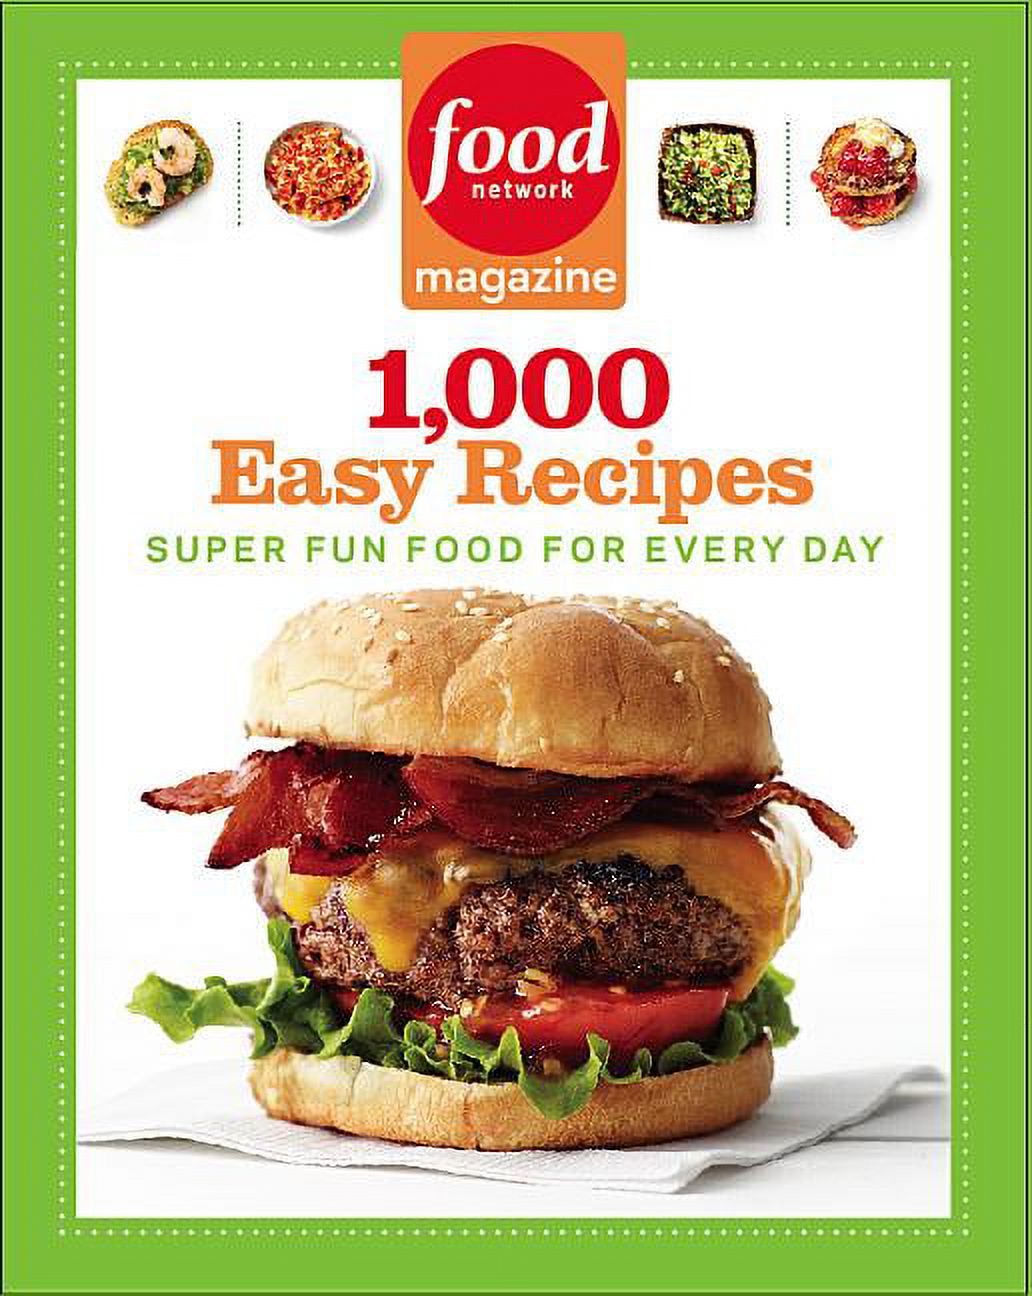 Food Network Magazine 1,000 Easy Recipes: Super Fun Food for Every Day (Paperback) - image 1 of 1